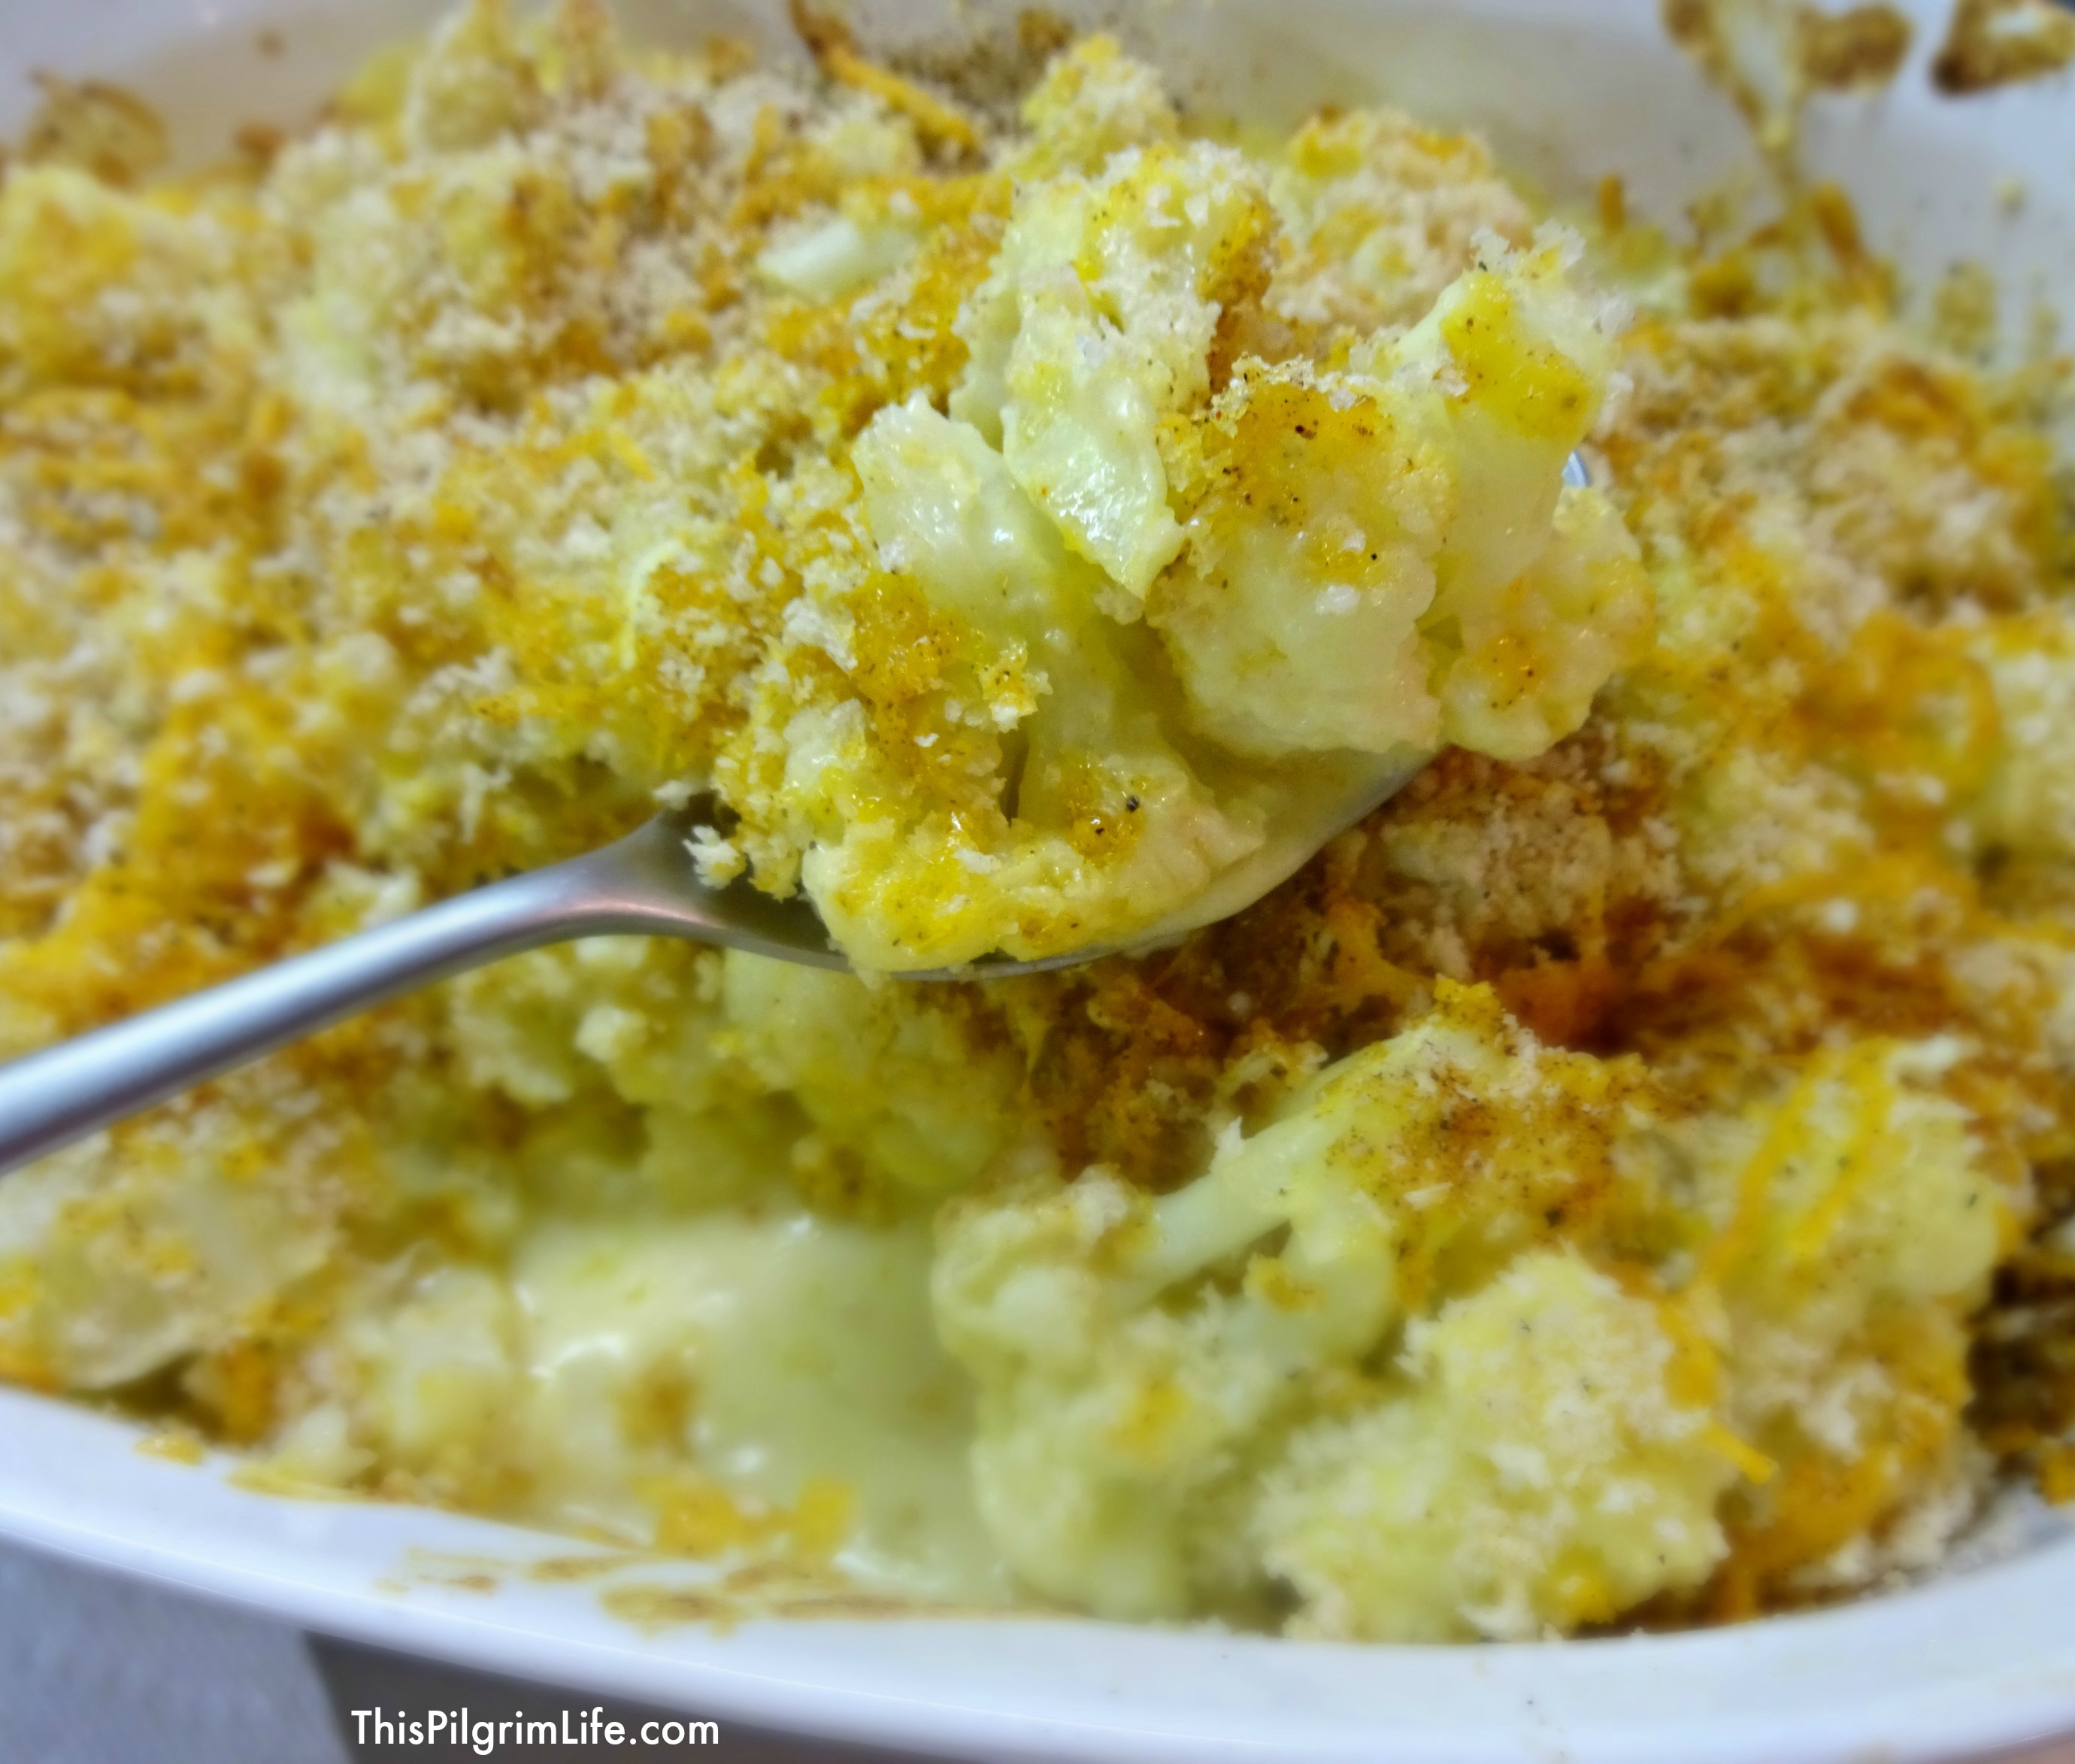 A comfort food side dish that is big on flavor, made with common kitchen ingredients :: healthy cauliflower tossed in a creamy sauce and topped with crunchy, cheesy goodness. 